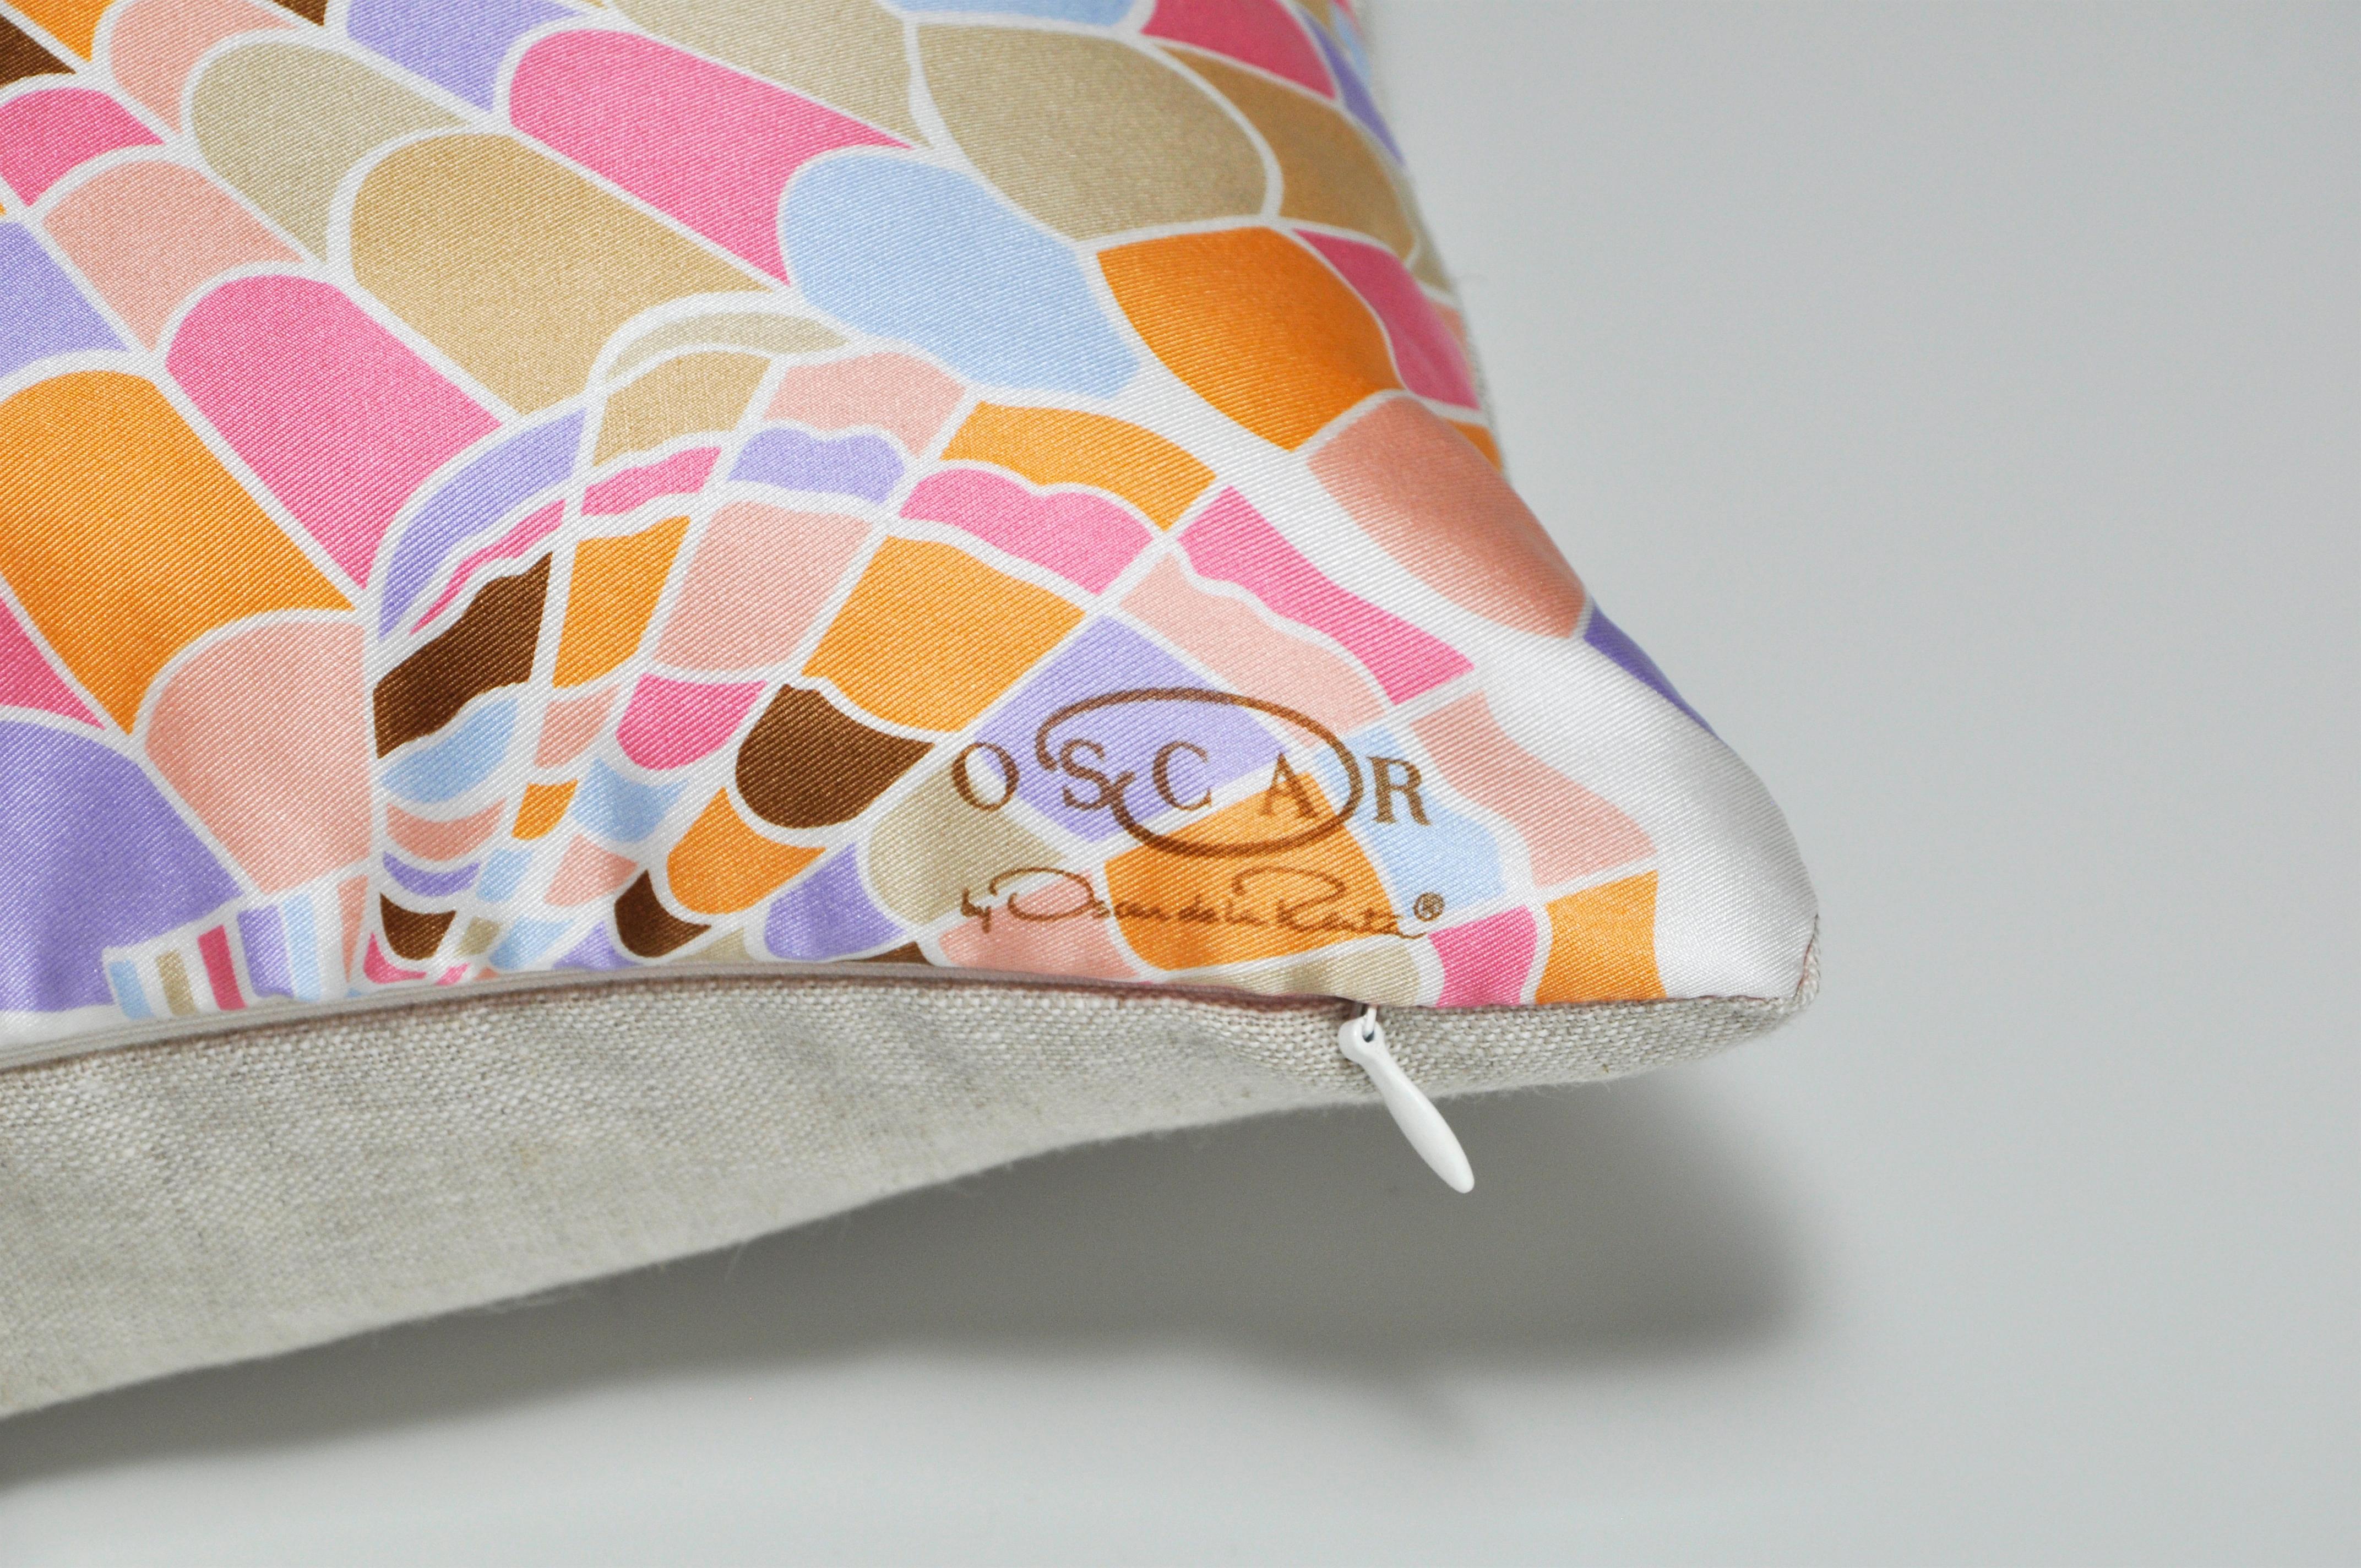 Title:
Vintage Oscar de la Renta pink silk scarf with Irish linen cushion pillow pink

Description: 
Custom made one-of-a-kind set (which can be bought separately) of luxury cushions / pillows created from an exquisite silk ‘O Oscar by Oscar de la